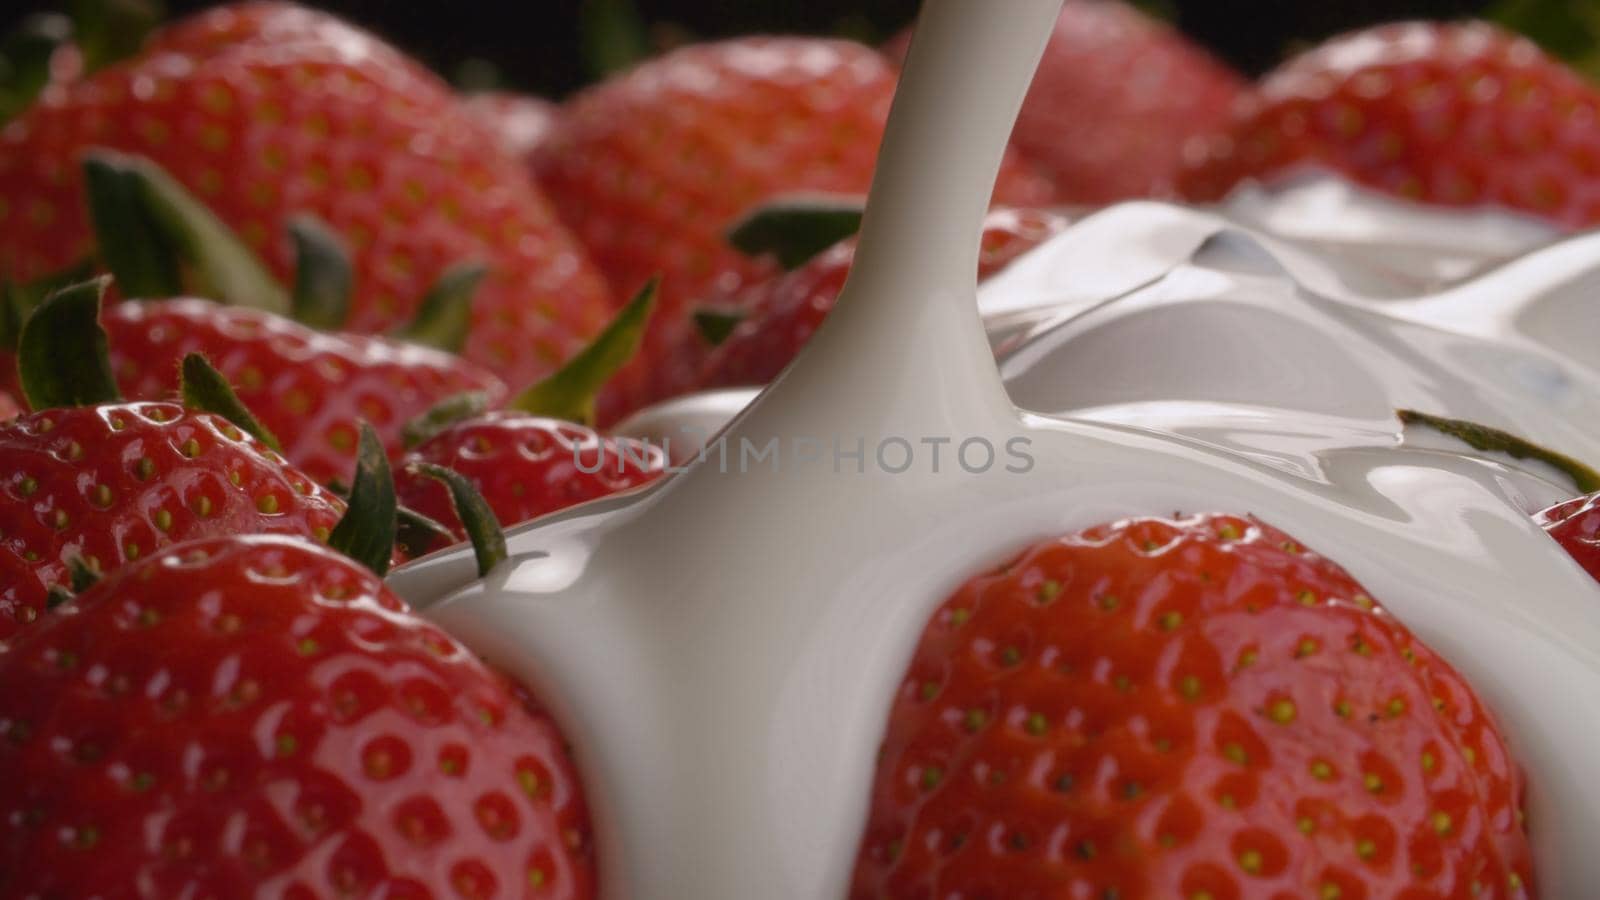 Yogurt pouring onto strawberries by Alize